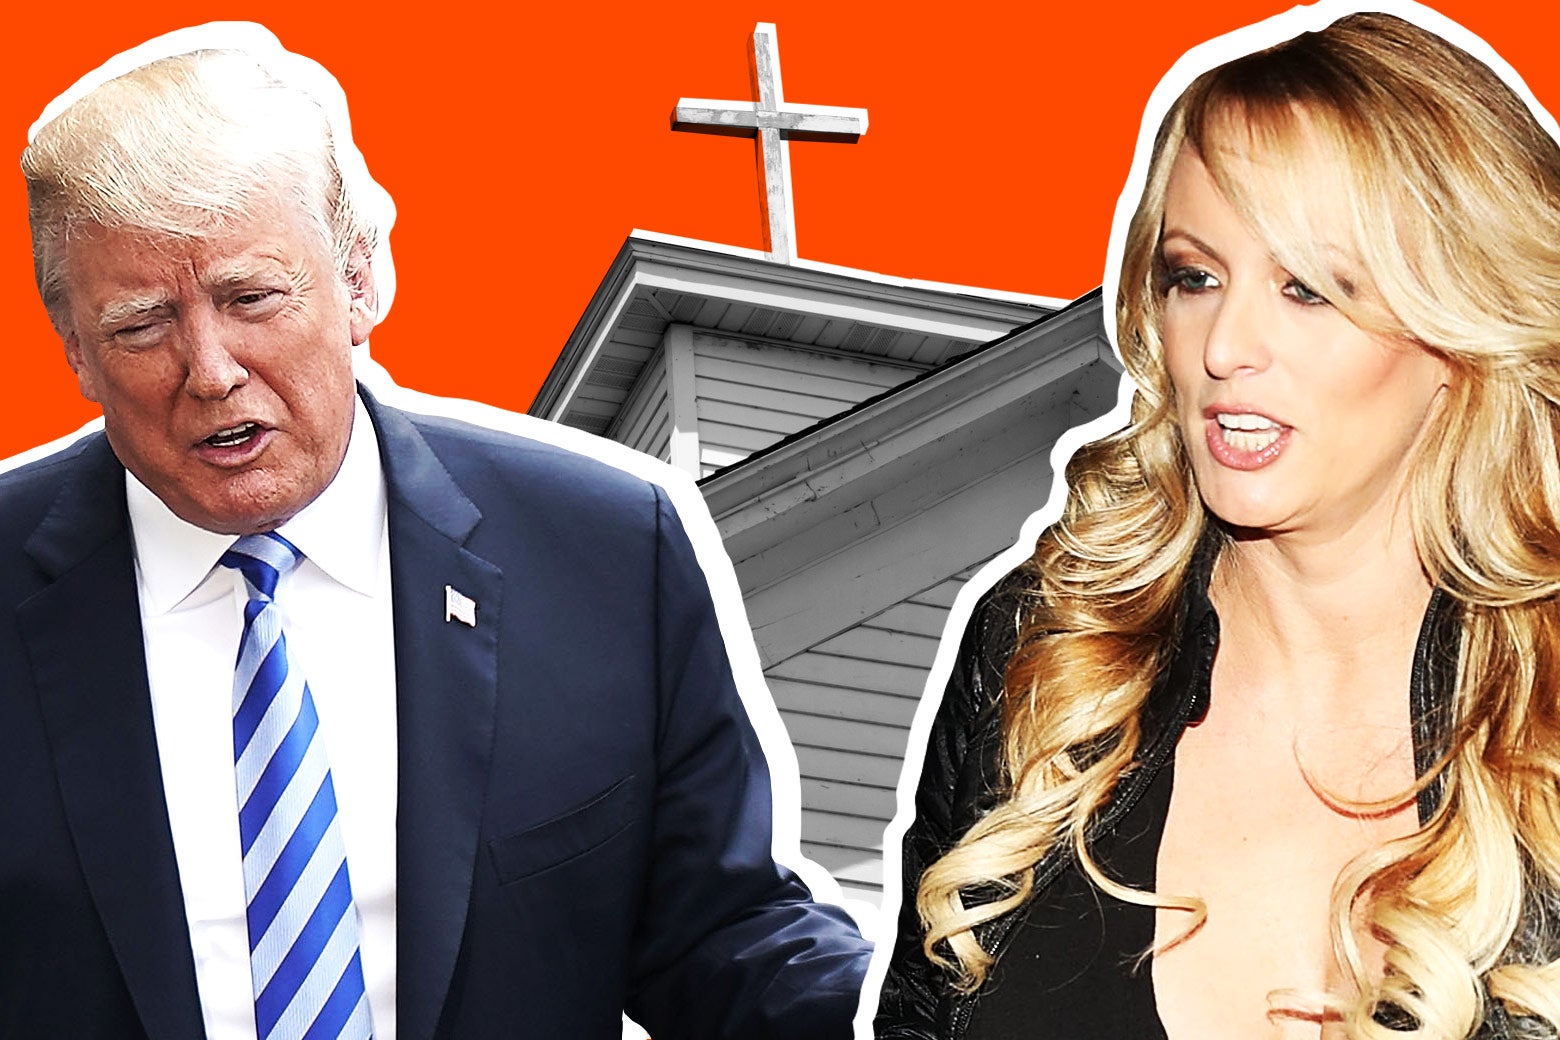 White evangelicals would keep supporting Trump even without Roe v